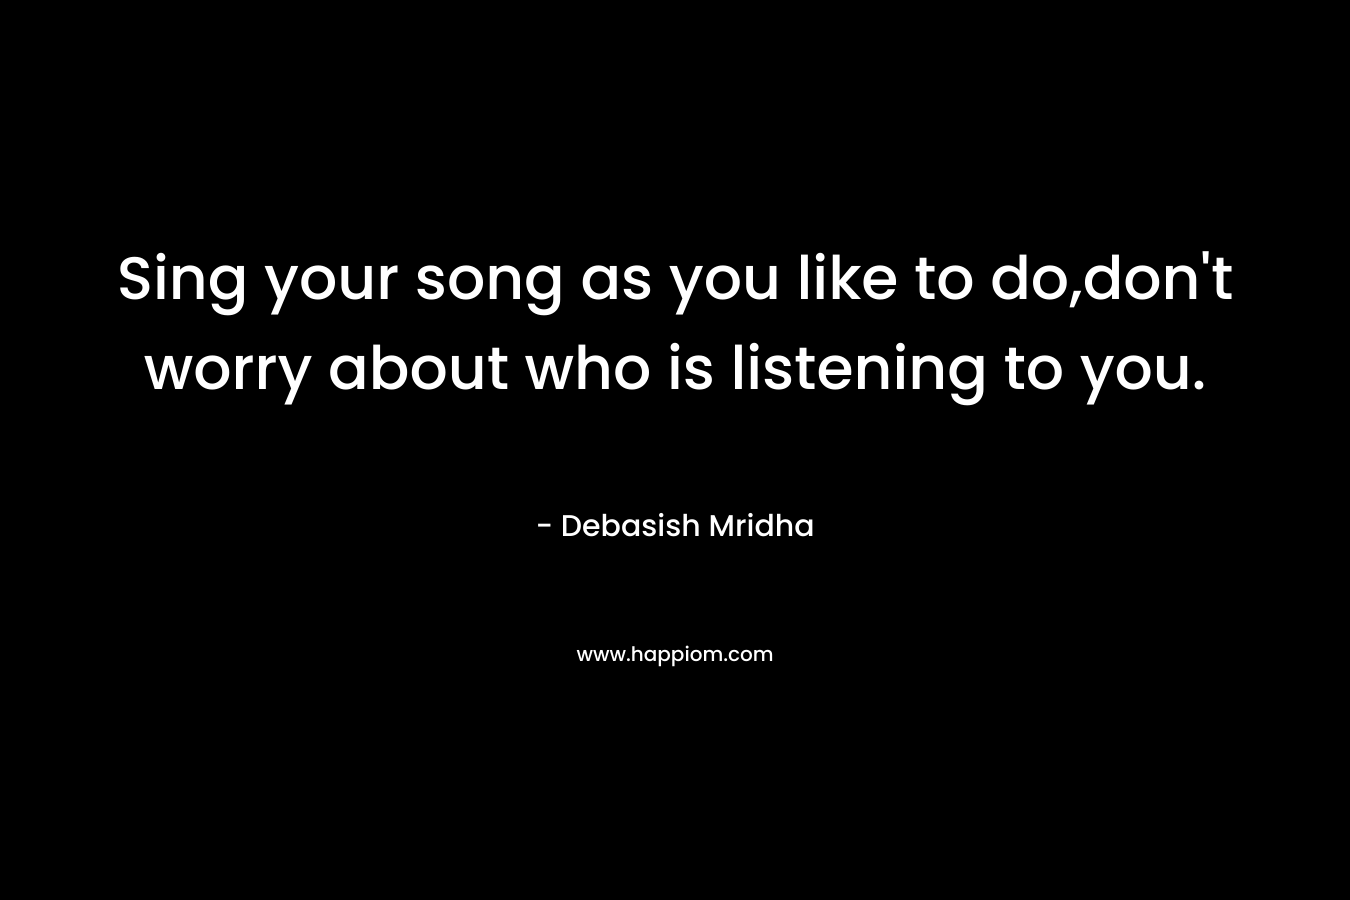 Sing your song as you like to do,don’t worry about who is listening to you. – Debasish Mridha